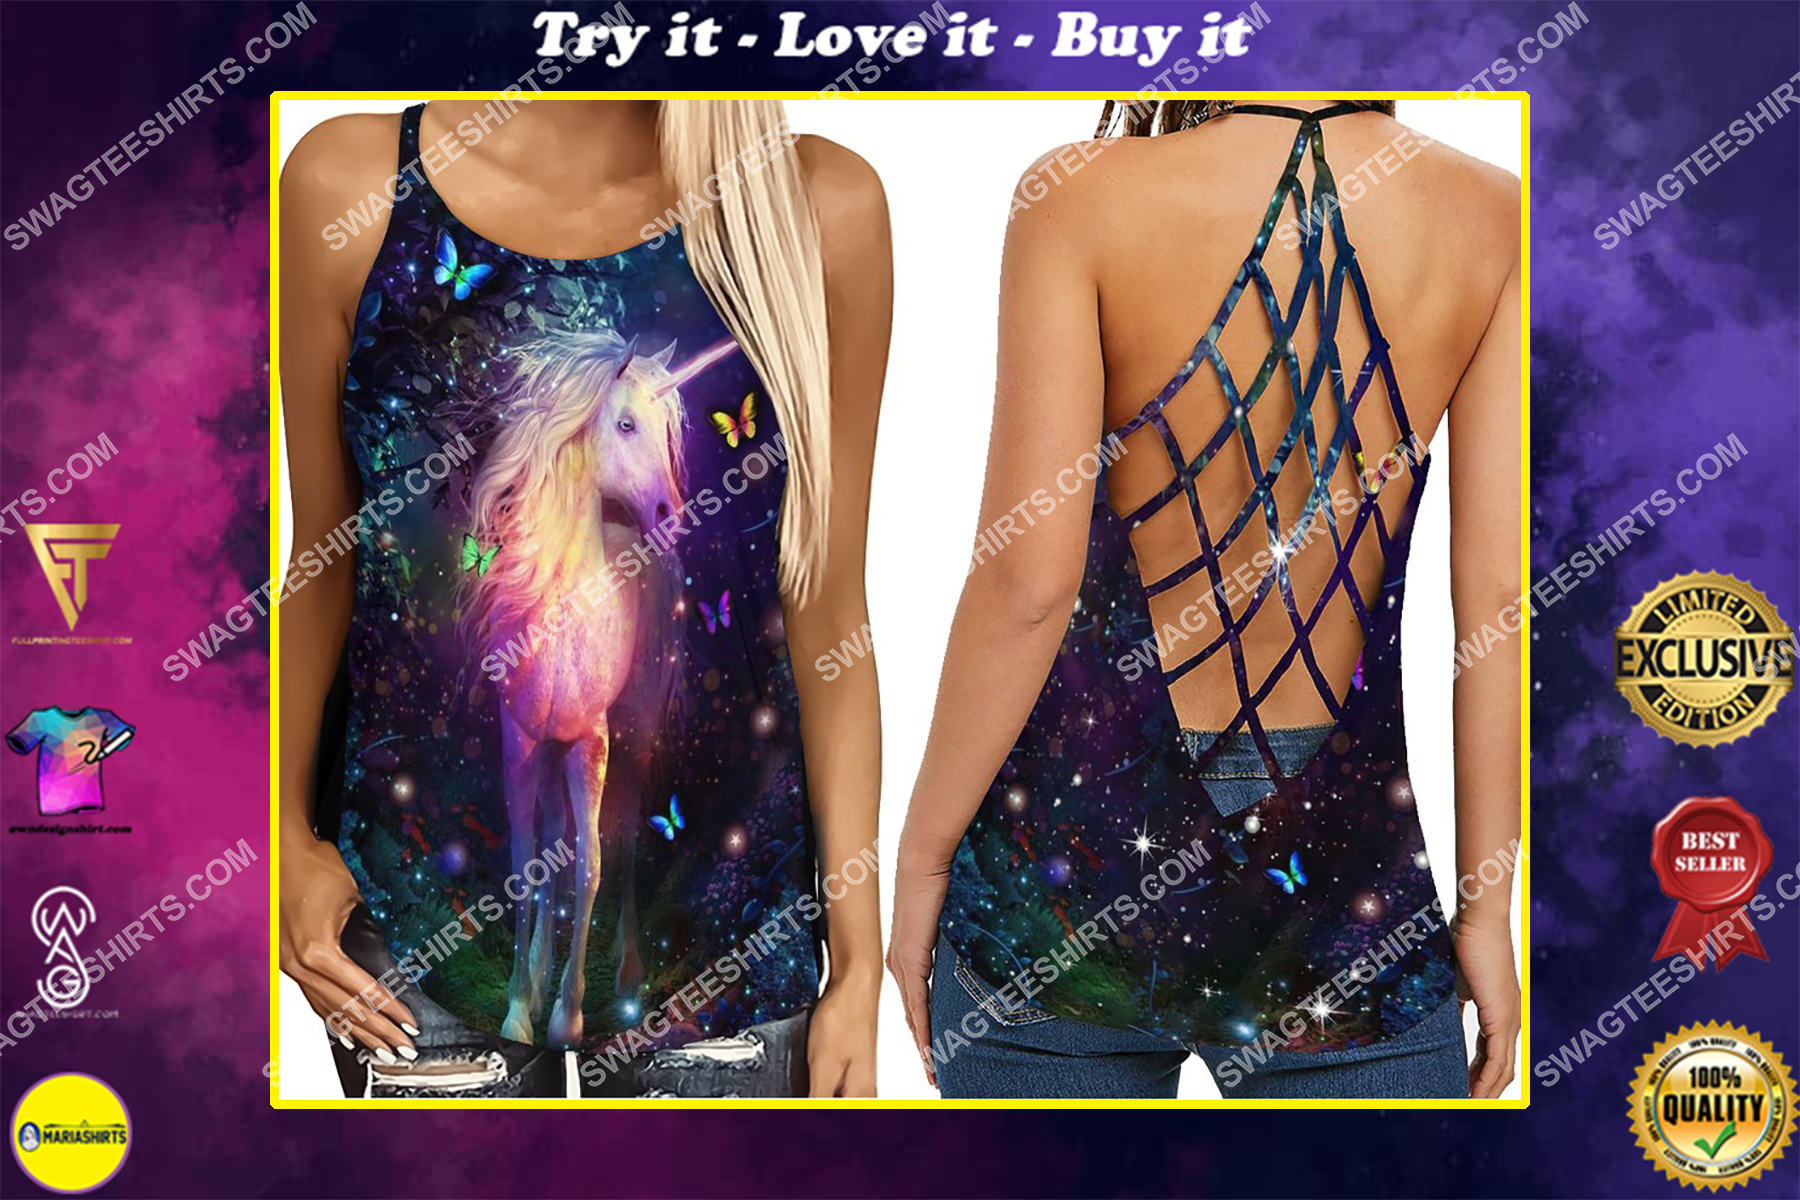 butterfly and unicorn full print criss-cross tank top